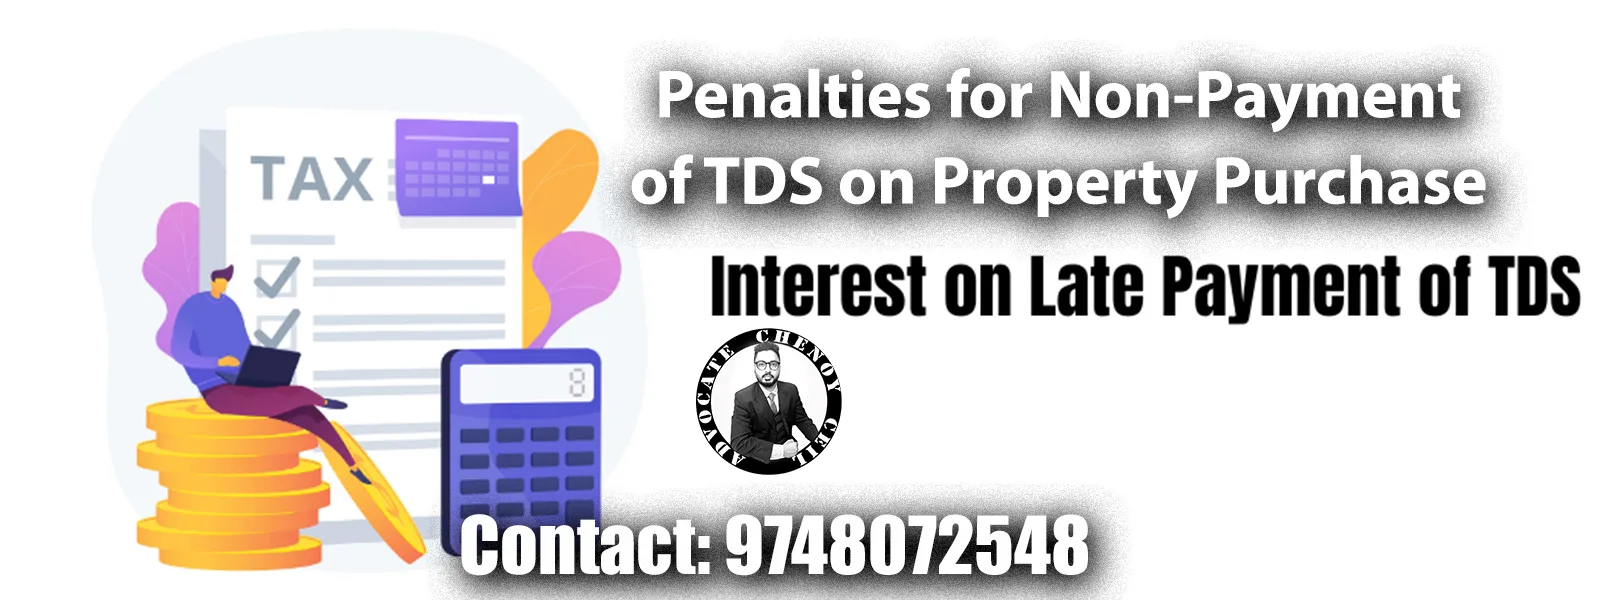 Penalties for Non-Payment of TDS on Property Purchases